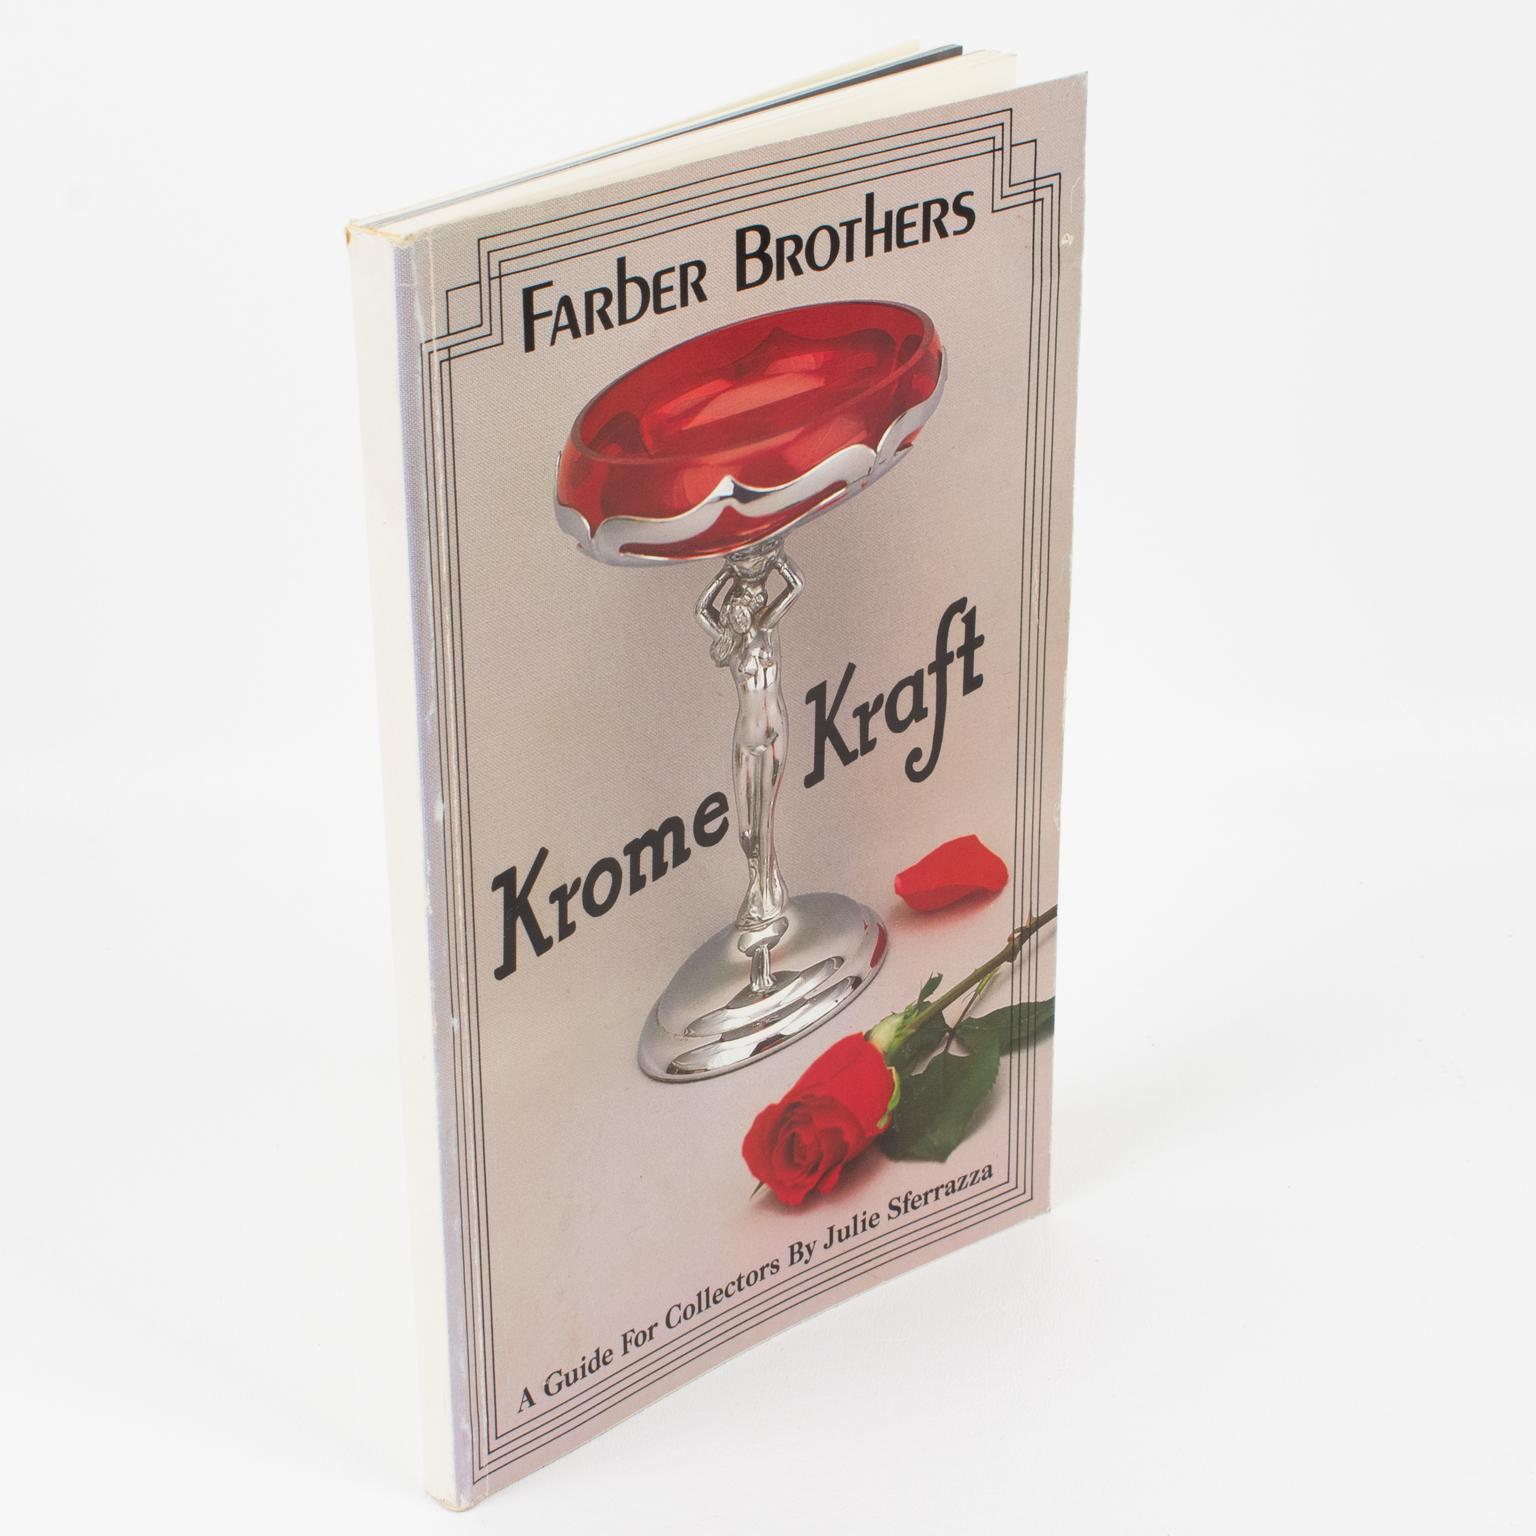 Farber Brothers, Krome Kraft, a guide for collectors. English book, by Julie Sferrazza, 1988.
The book contains information on each piece, including the glass manufacturer, color, and additional black-and-white illustrations. It is a must-have for